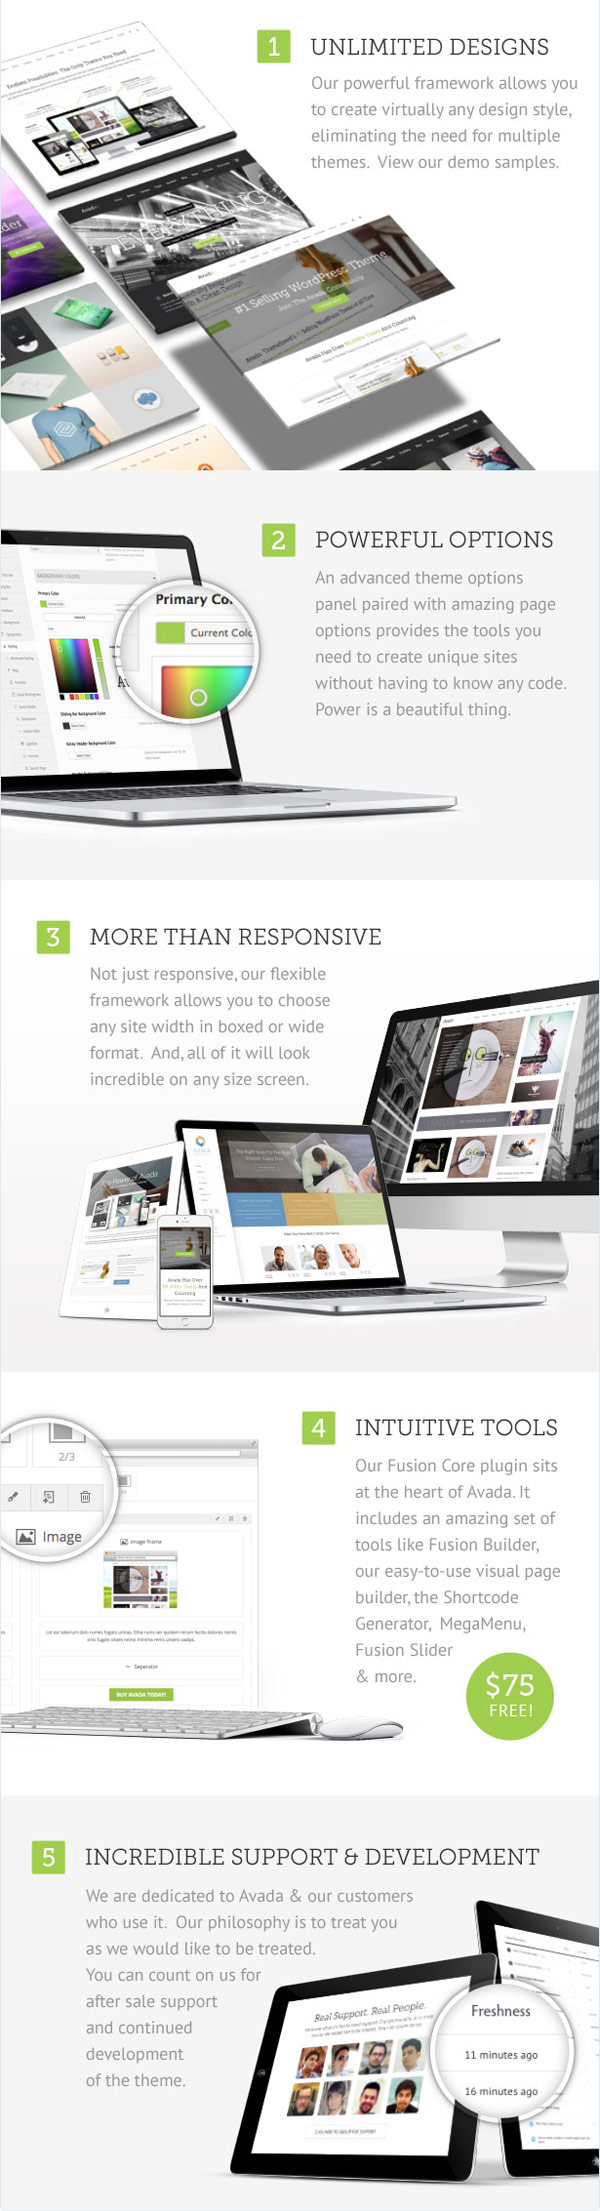 The responsive Avada WordPress theme provides unlimited designs, powerful options, and intuitive tools.